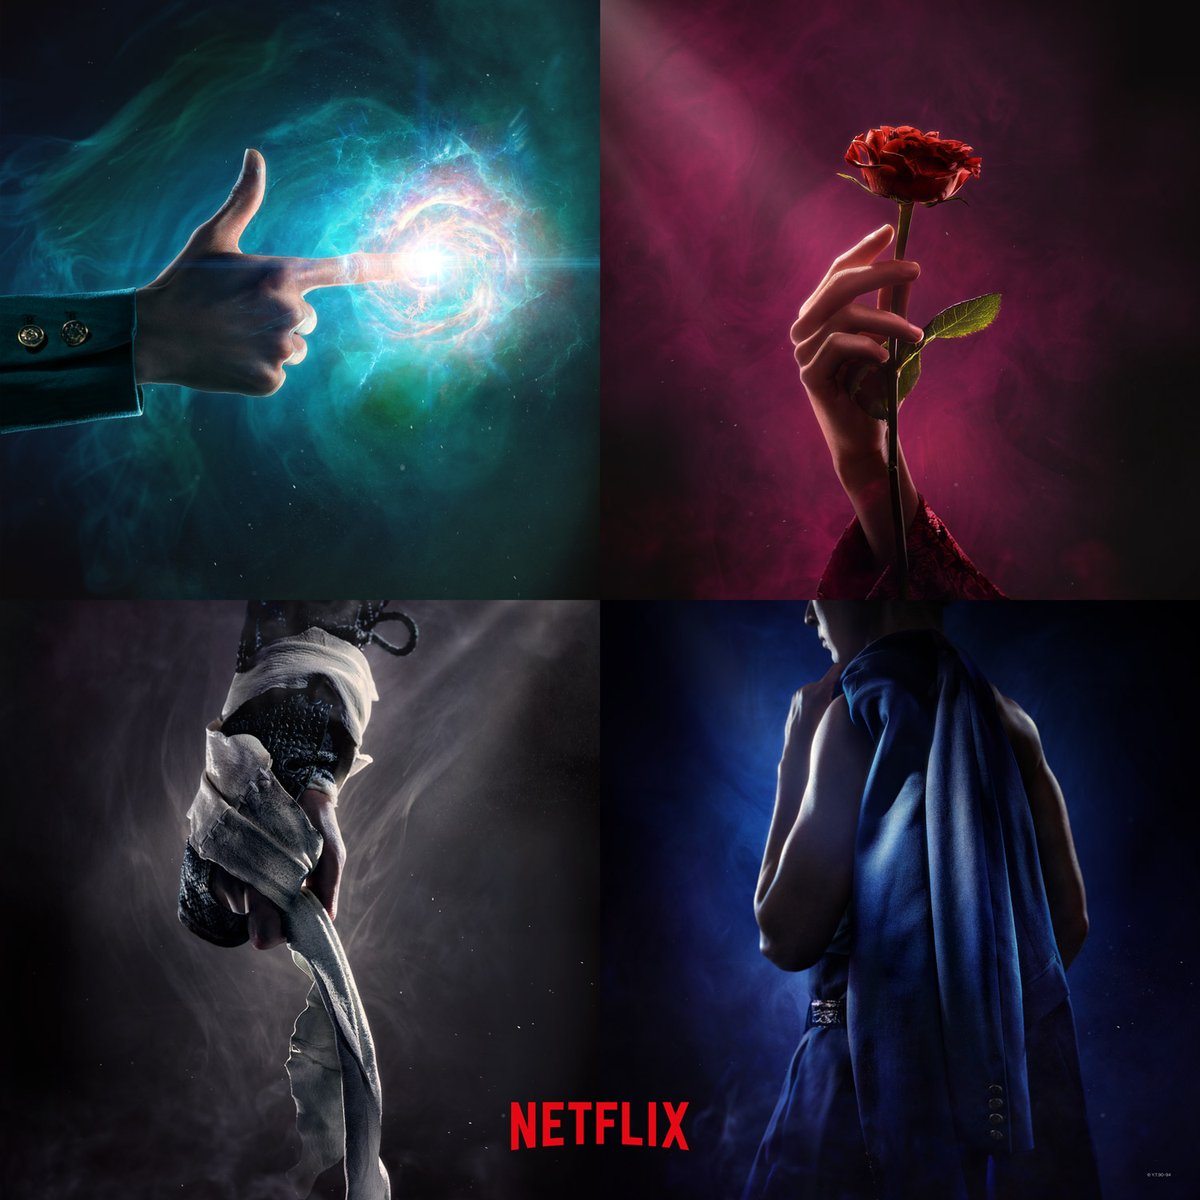 unveiling the cast of the live-action Yu Yu Hakusho over the next few days! stay tuned to this thread